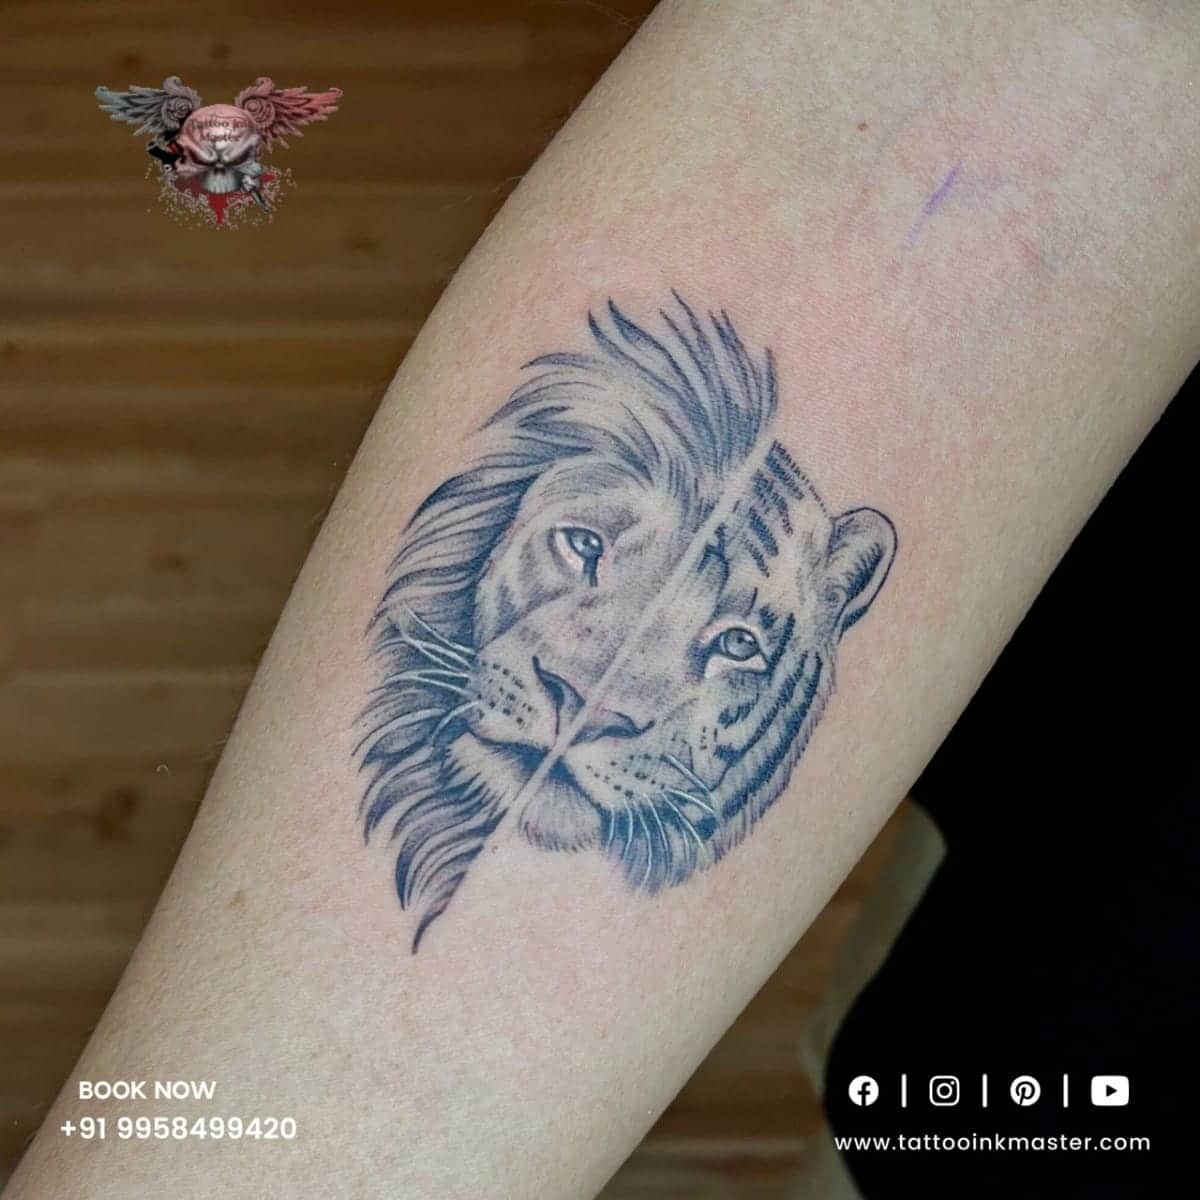 Dual Inked Tattoo of a Lion and Tiger | Tattoo Ink Master